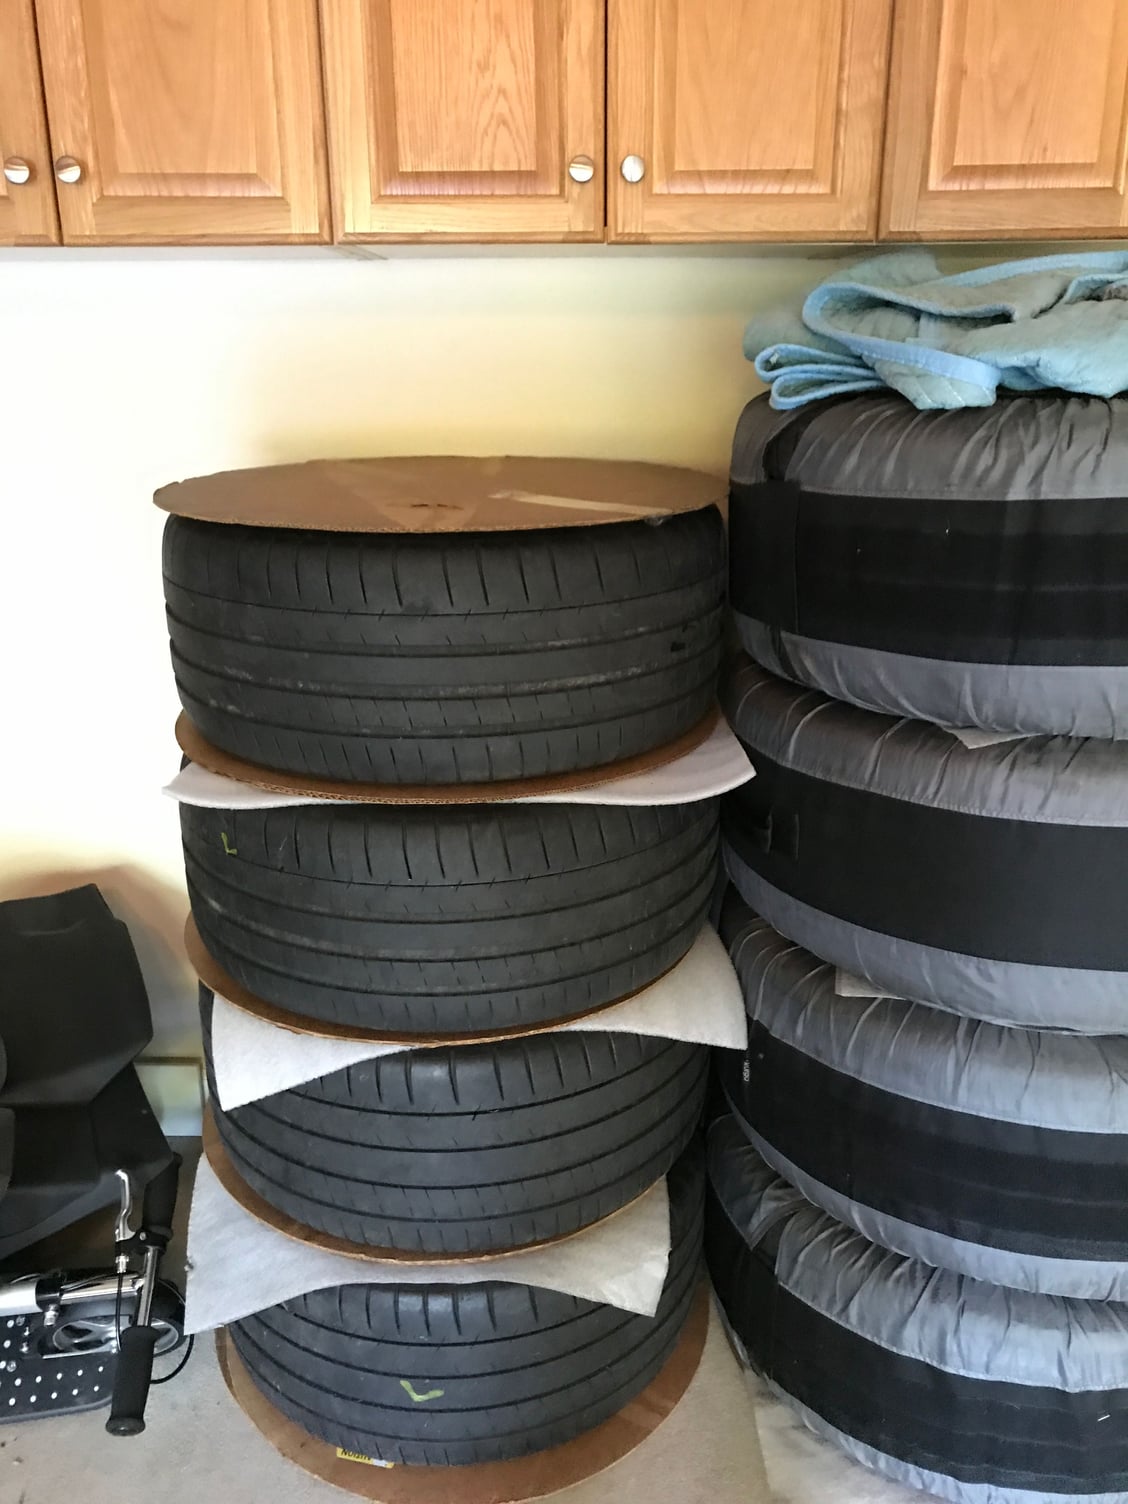 Wheels and Tires/Axles - W212 E63 18 Inch OEM Rims and Michelin Tires - Very Good Condition - Used - 2011 to 2017 Mercedes-Benz E63 AMG - Chicago, IL 60521, United States